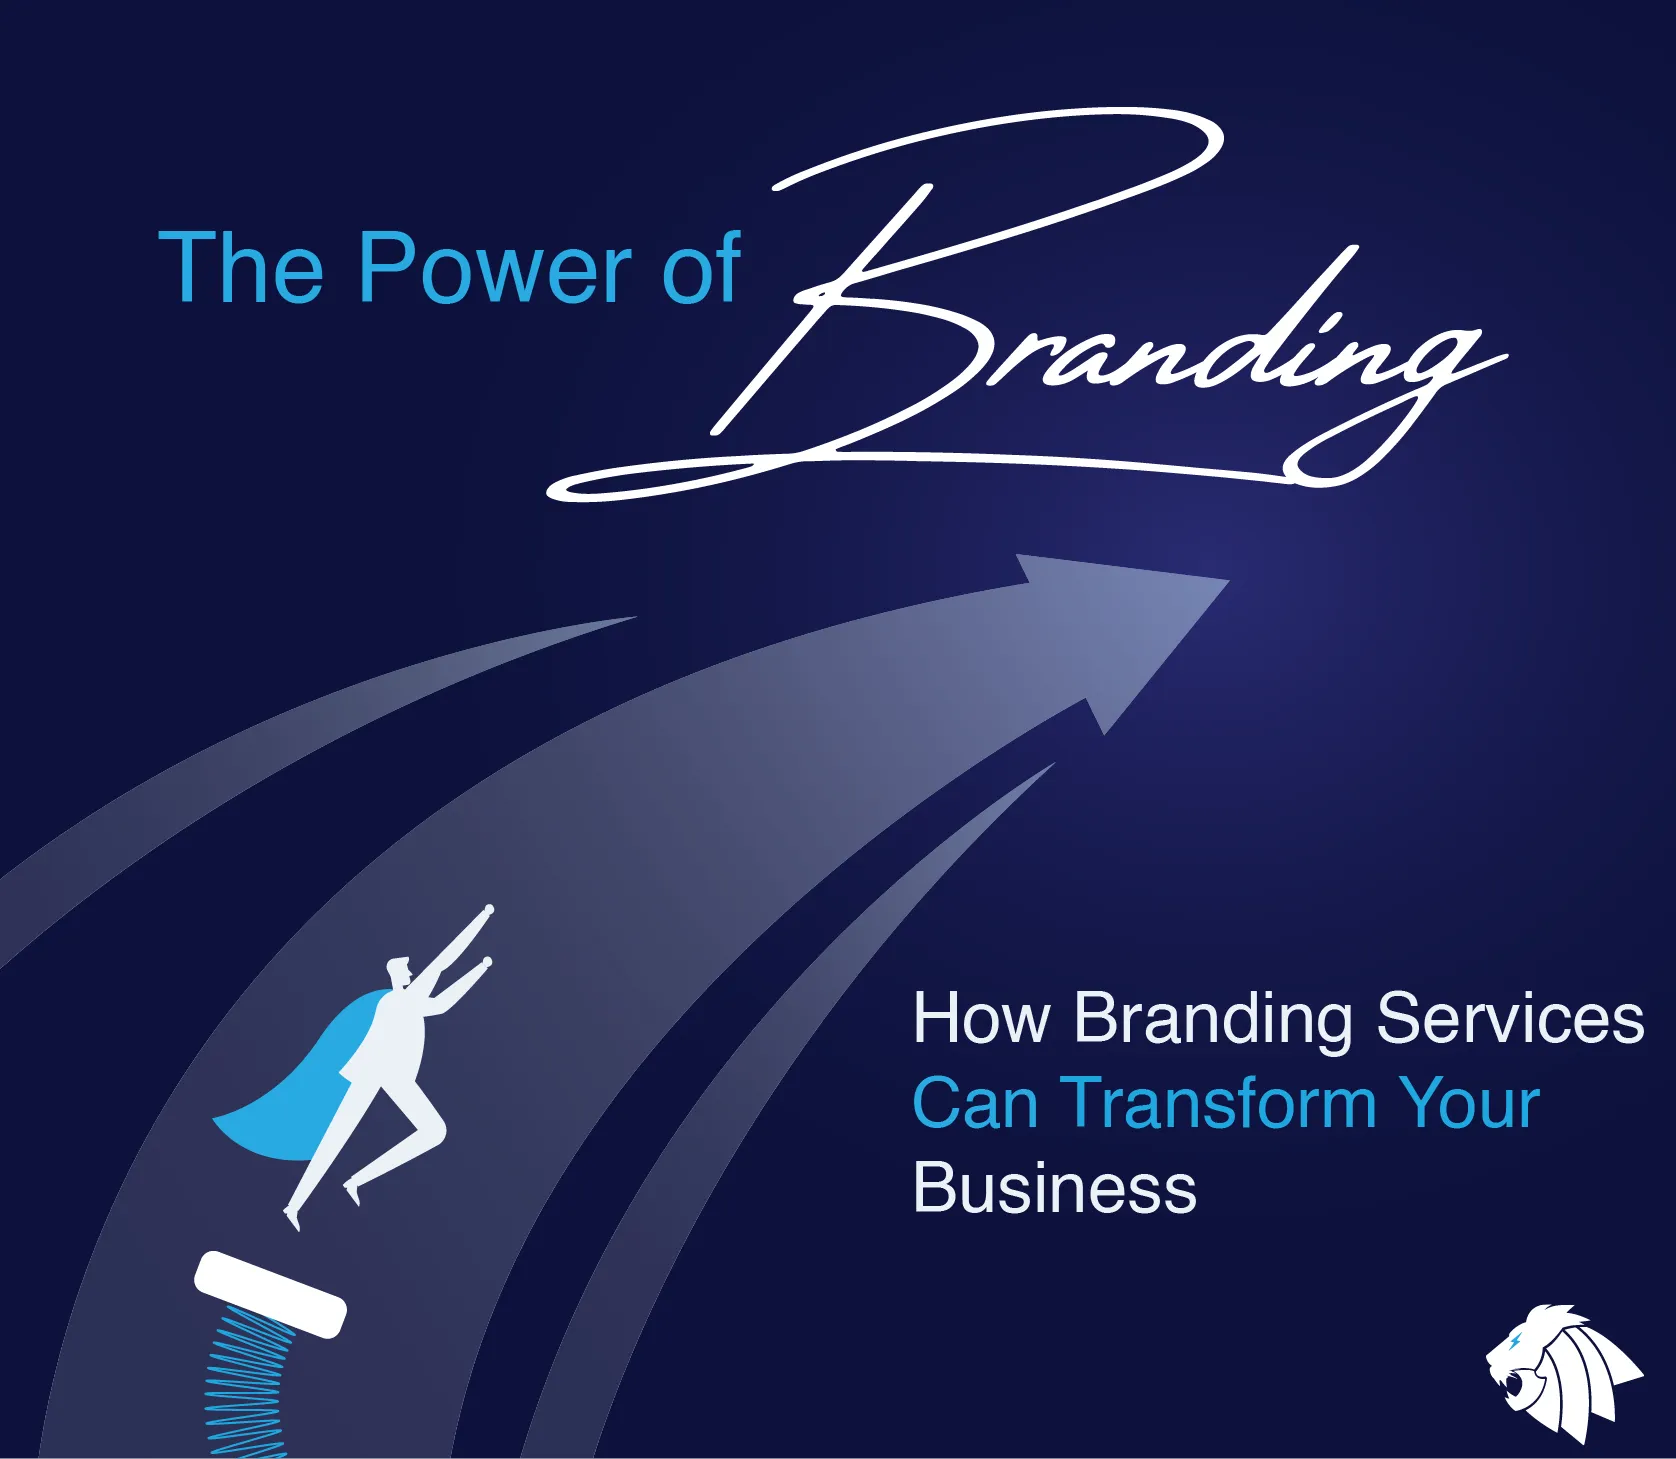 The Power of Branding: How Branding Services Can Transform Your Business